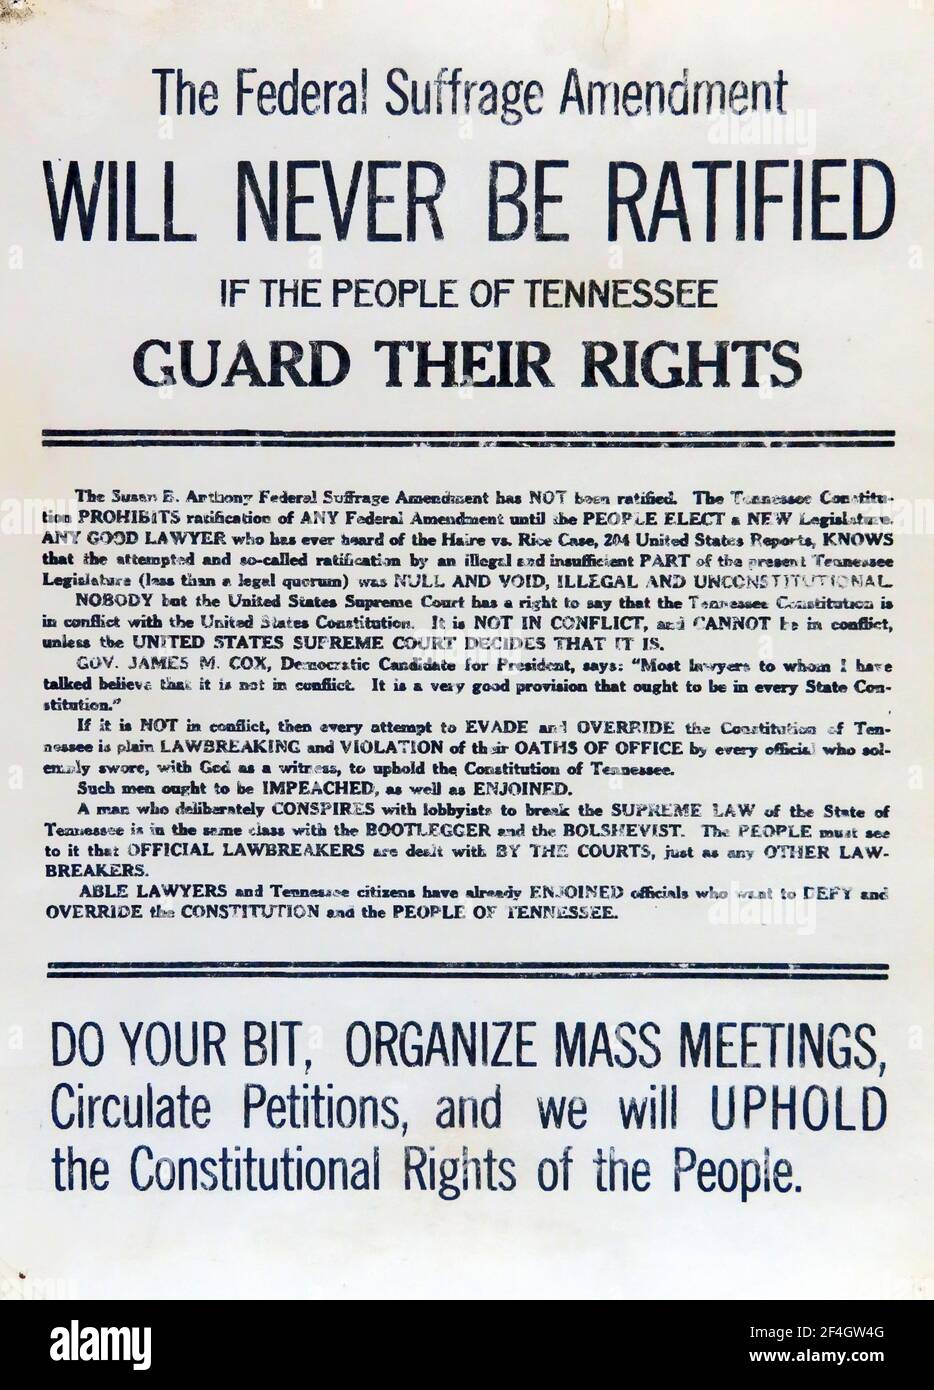 Tennessee broadside claiming that 'The Federal Suffrage Amendment' was unconstitutional and 'Will Never be Ratified, ' printed for the American market, 1920. Photography by Emilia van Beugen. () Stock Photo